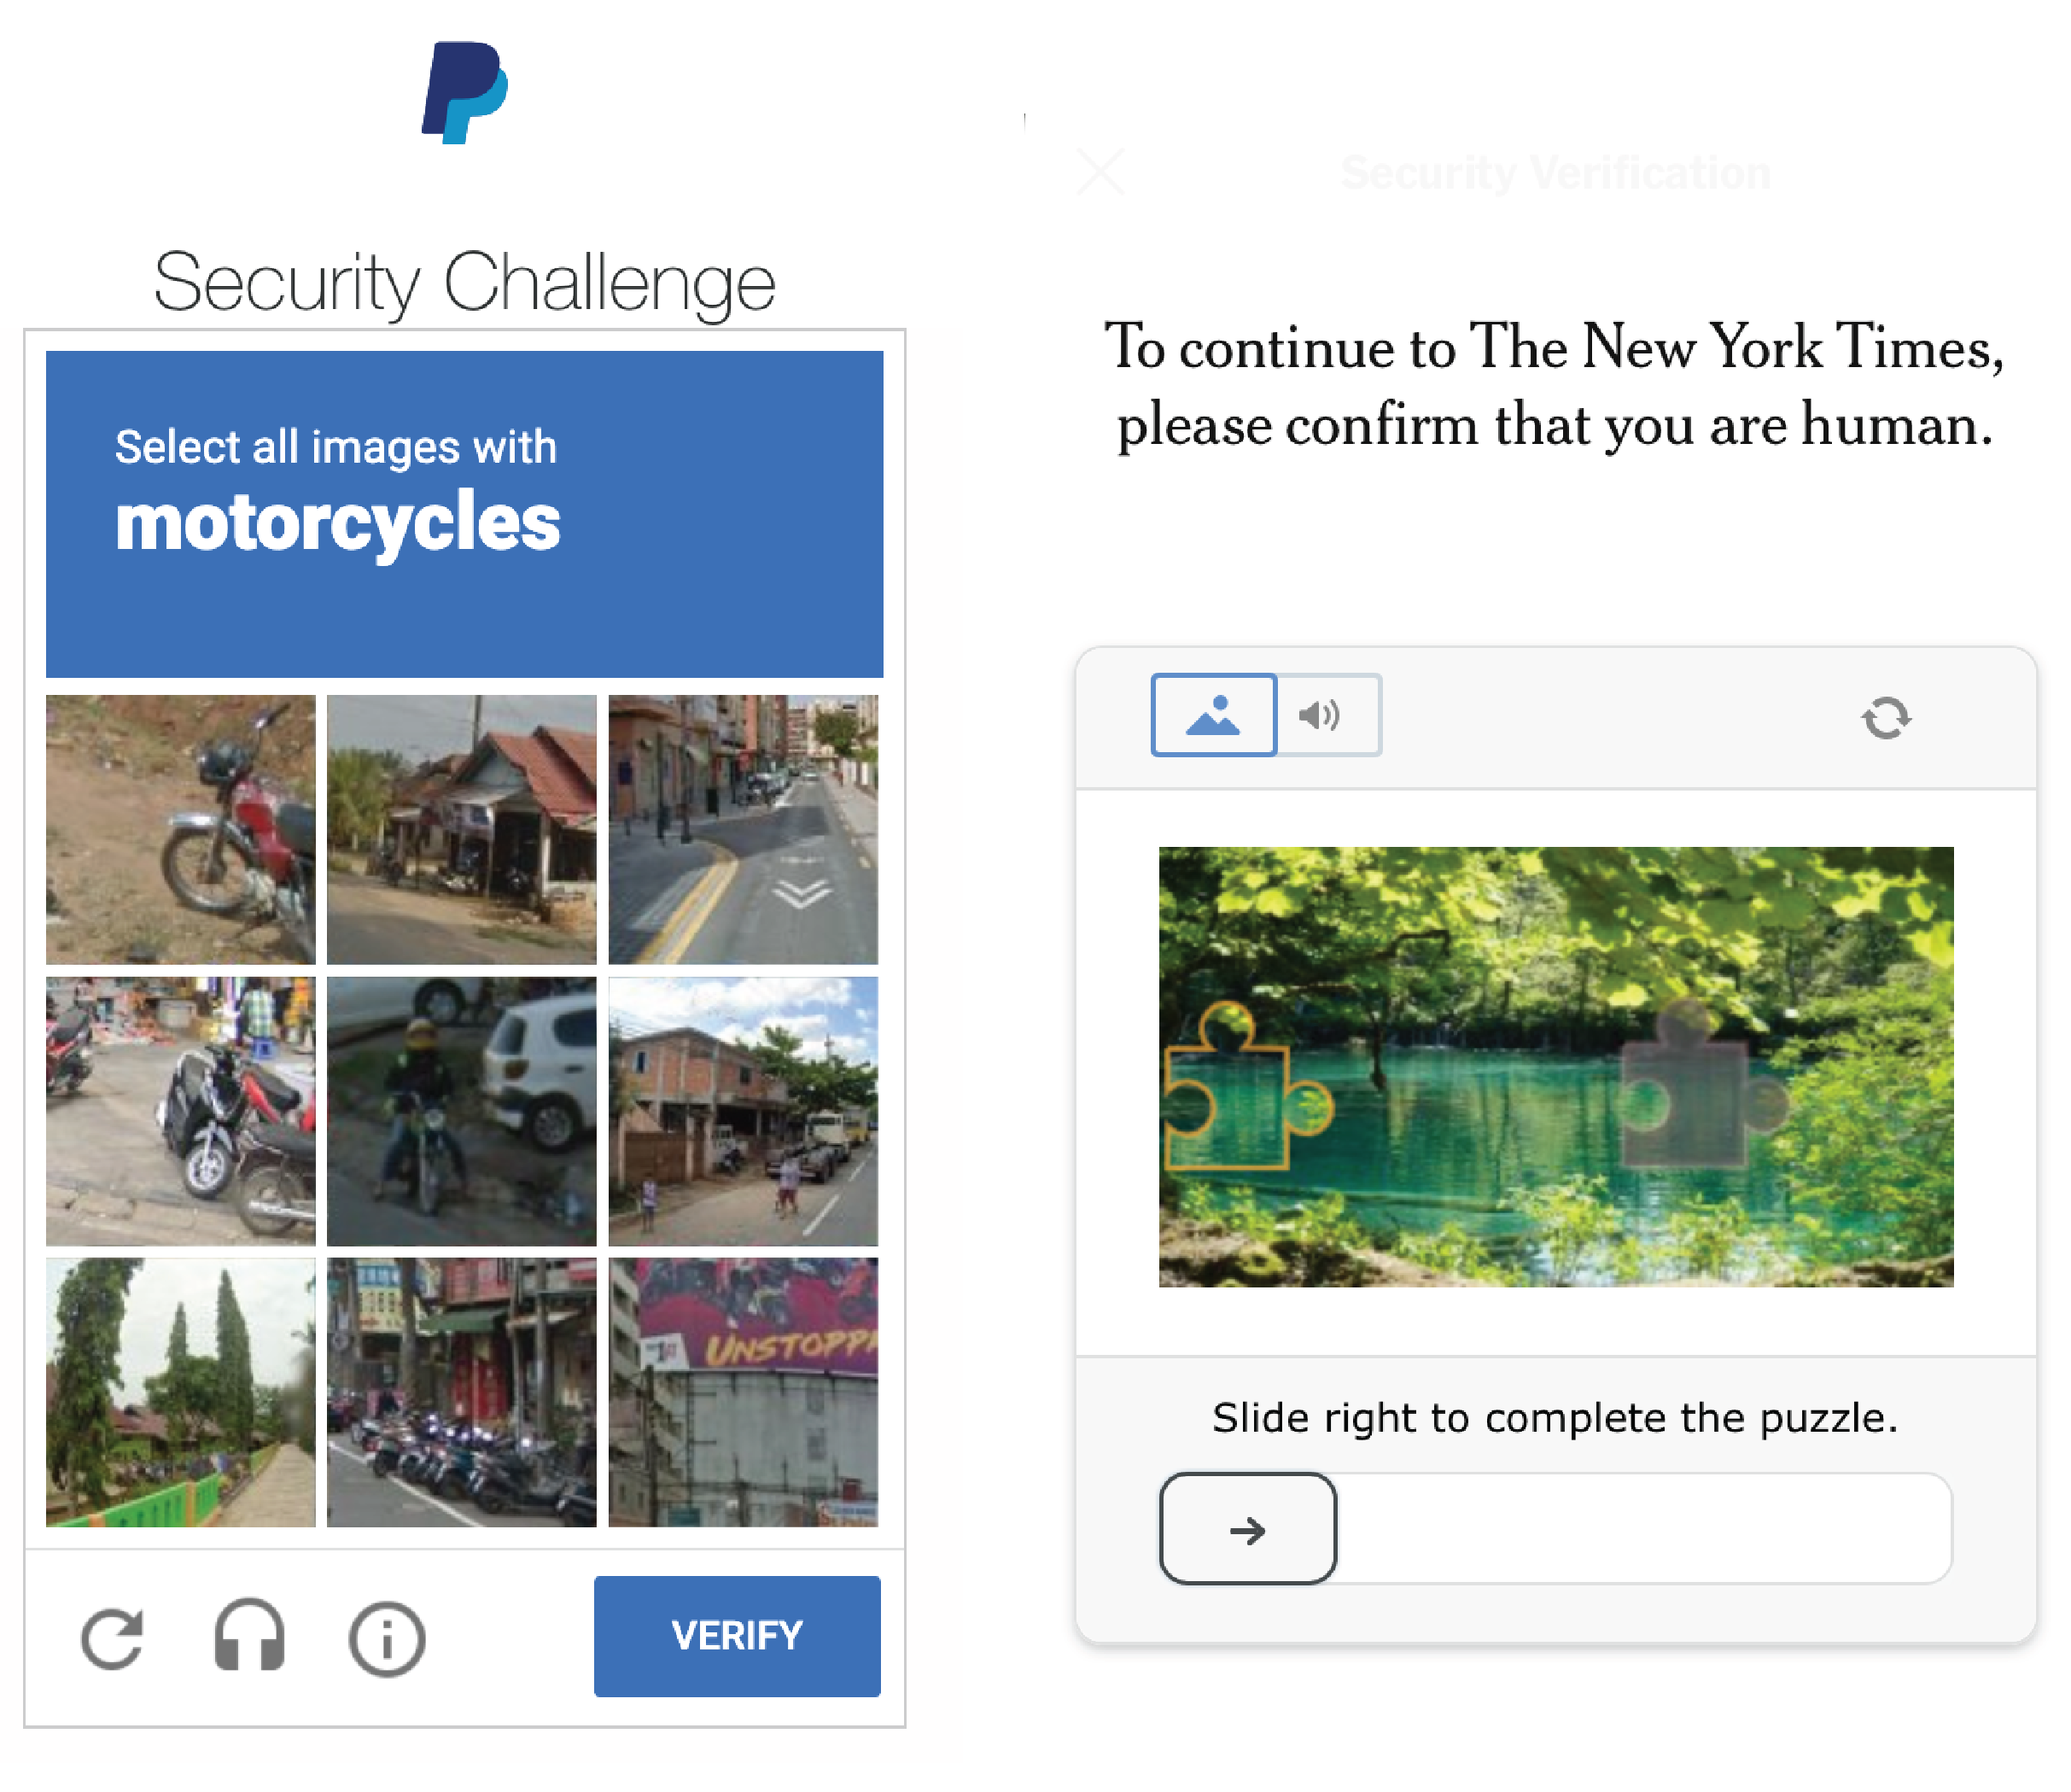 Two types of CAPTCHAs: one asks users to select all the squares with motorcycles; another asks users to slide a puzzle piece into the correct spot in an image. 